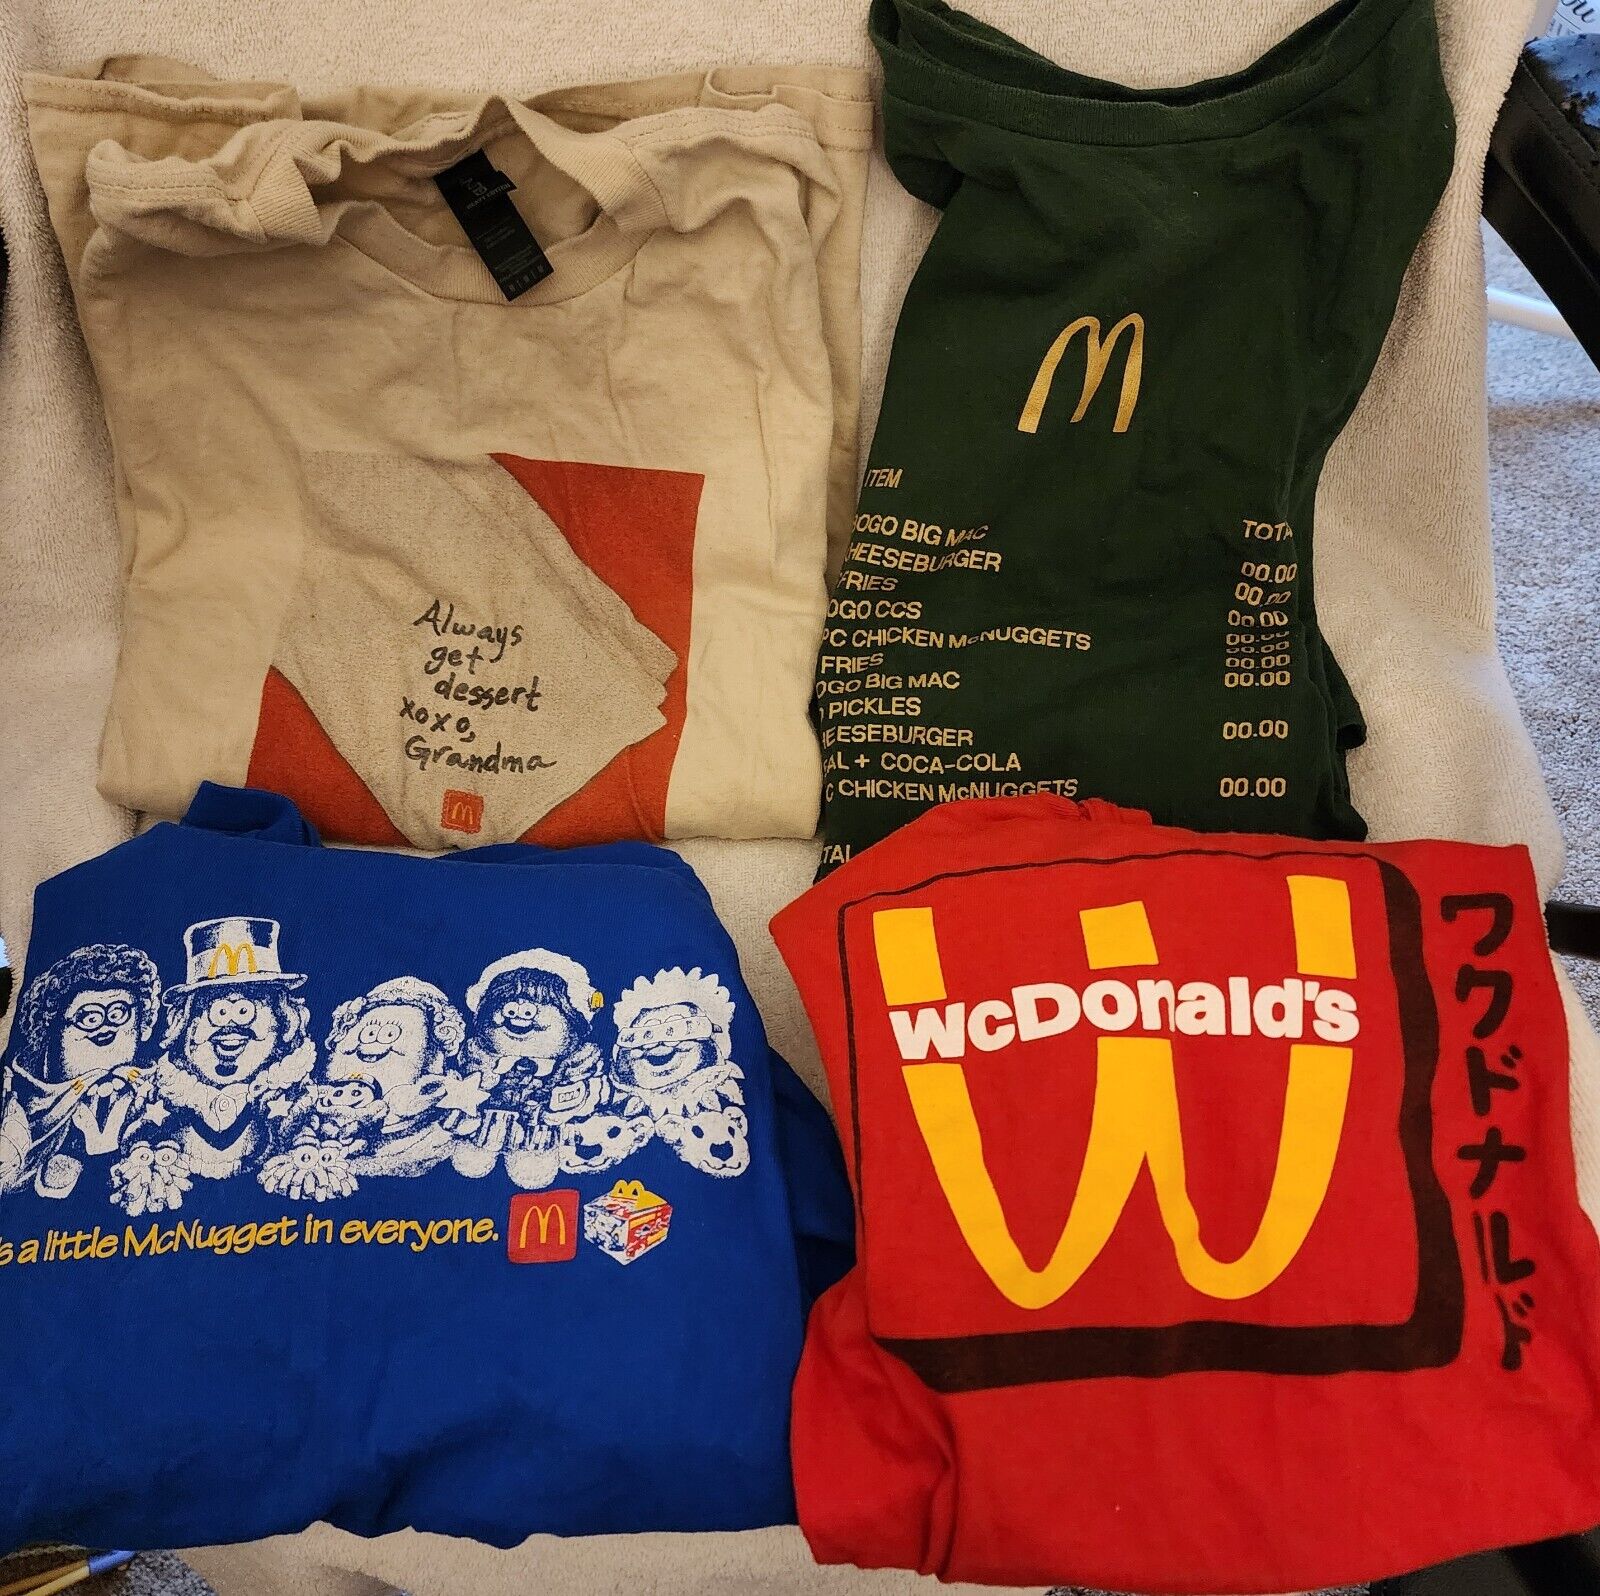 LOT OF 4 MCDONALD\'S EMPLOYEE PROMOTIONAL COLLECTIBLE T-SHIRTS - SIZE MEDIUM 